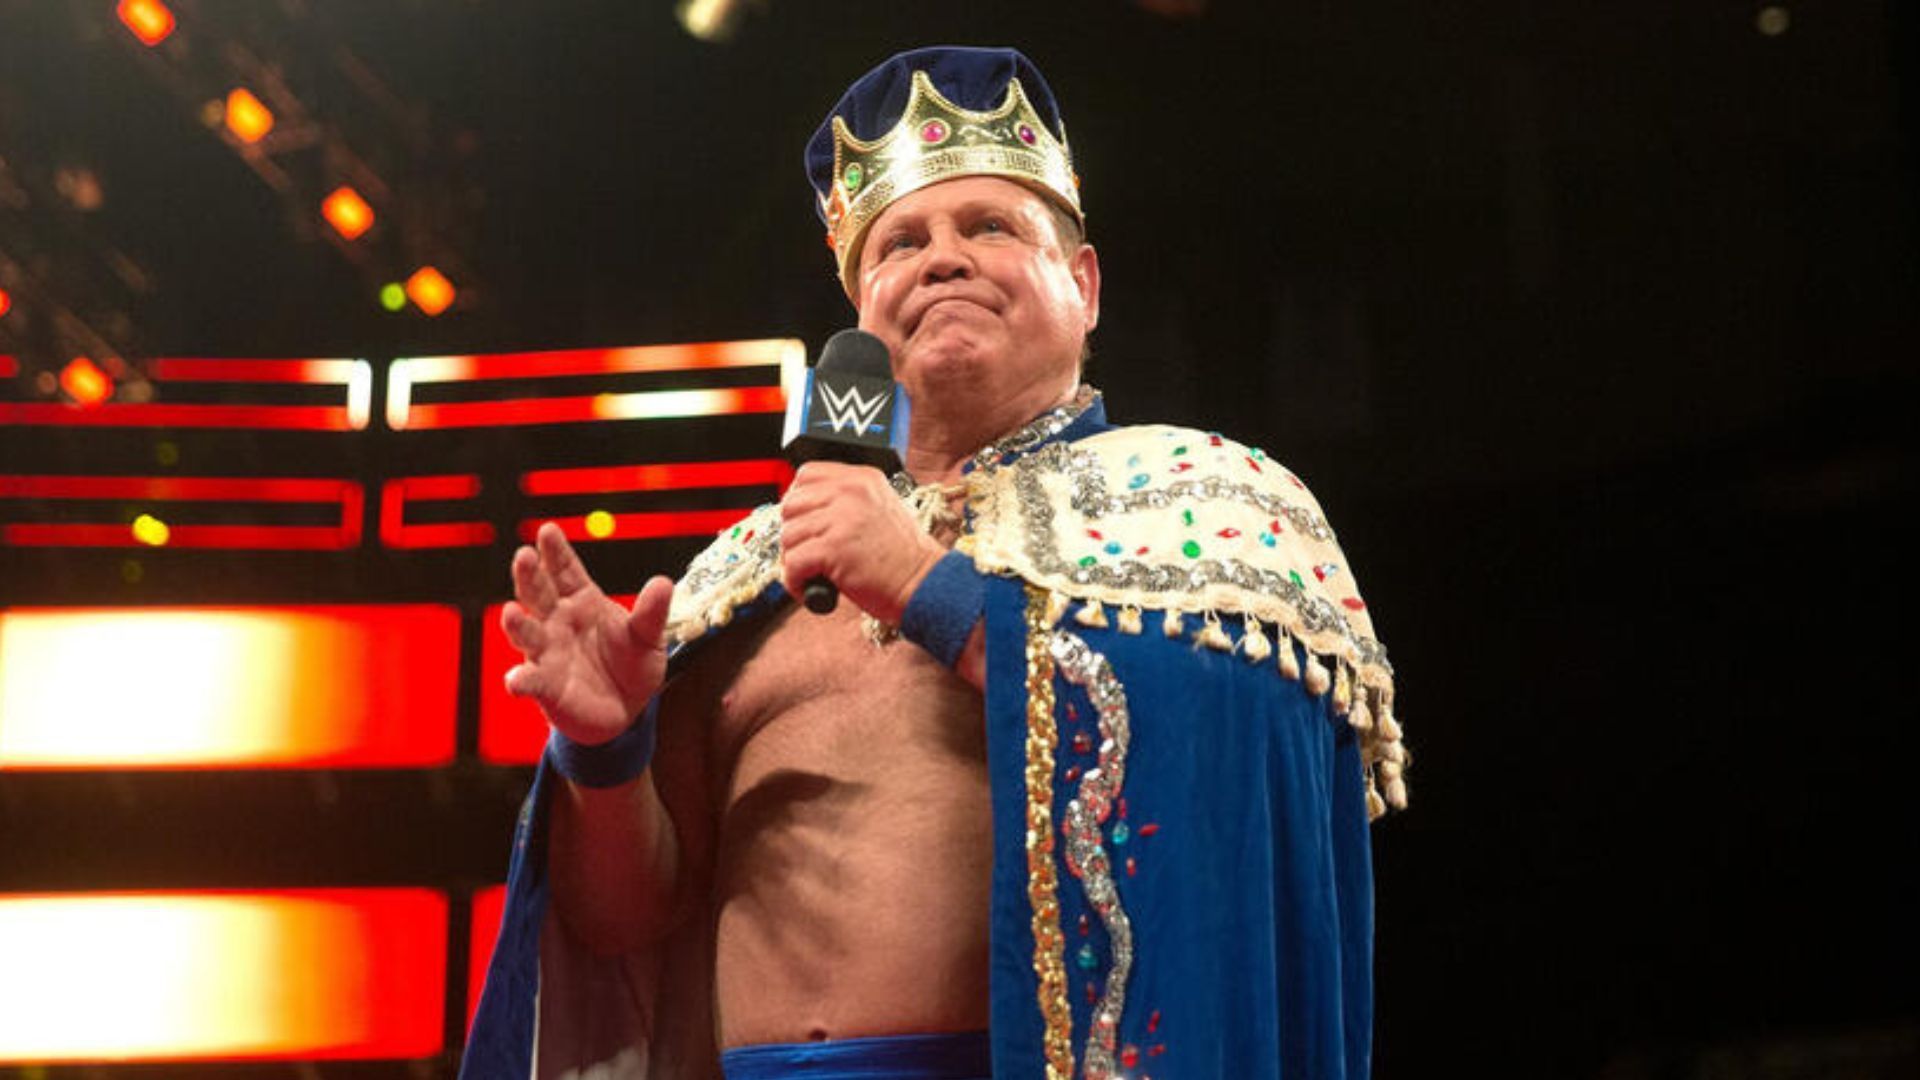 Lawler is a legend in the professional wrestling business. [Photo: WWE.com]